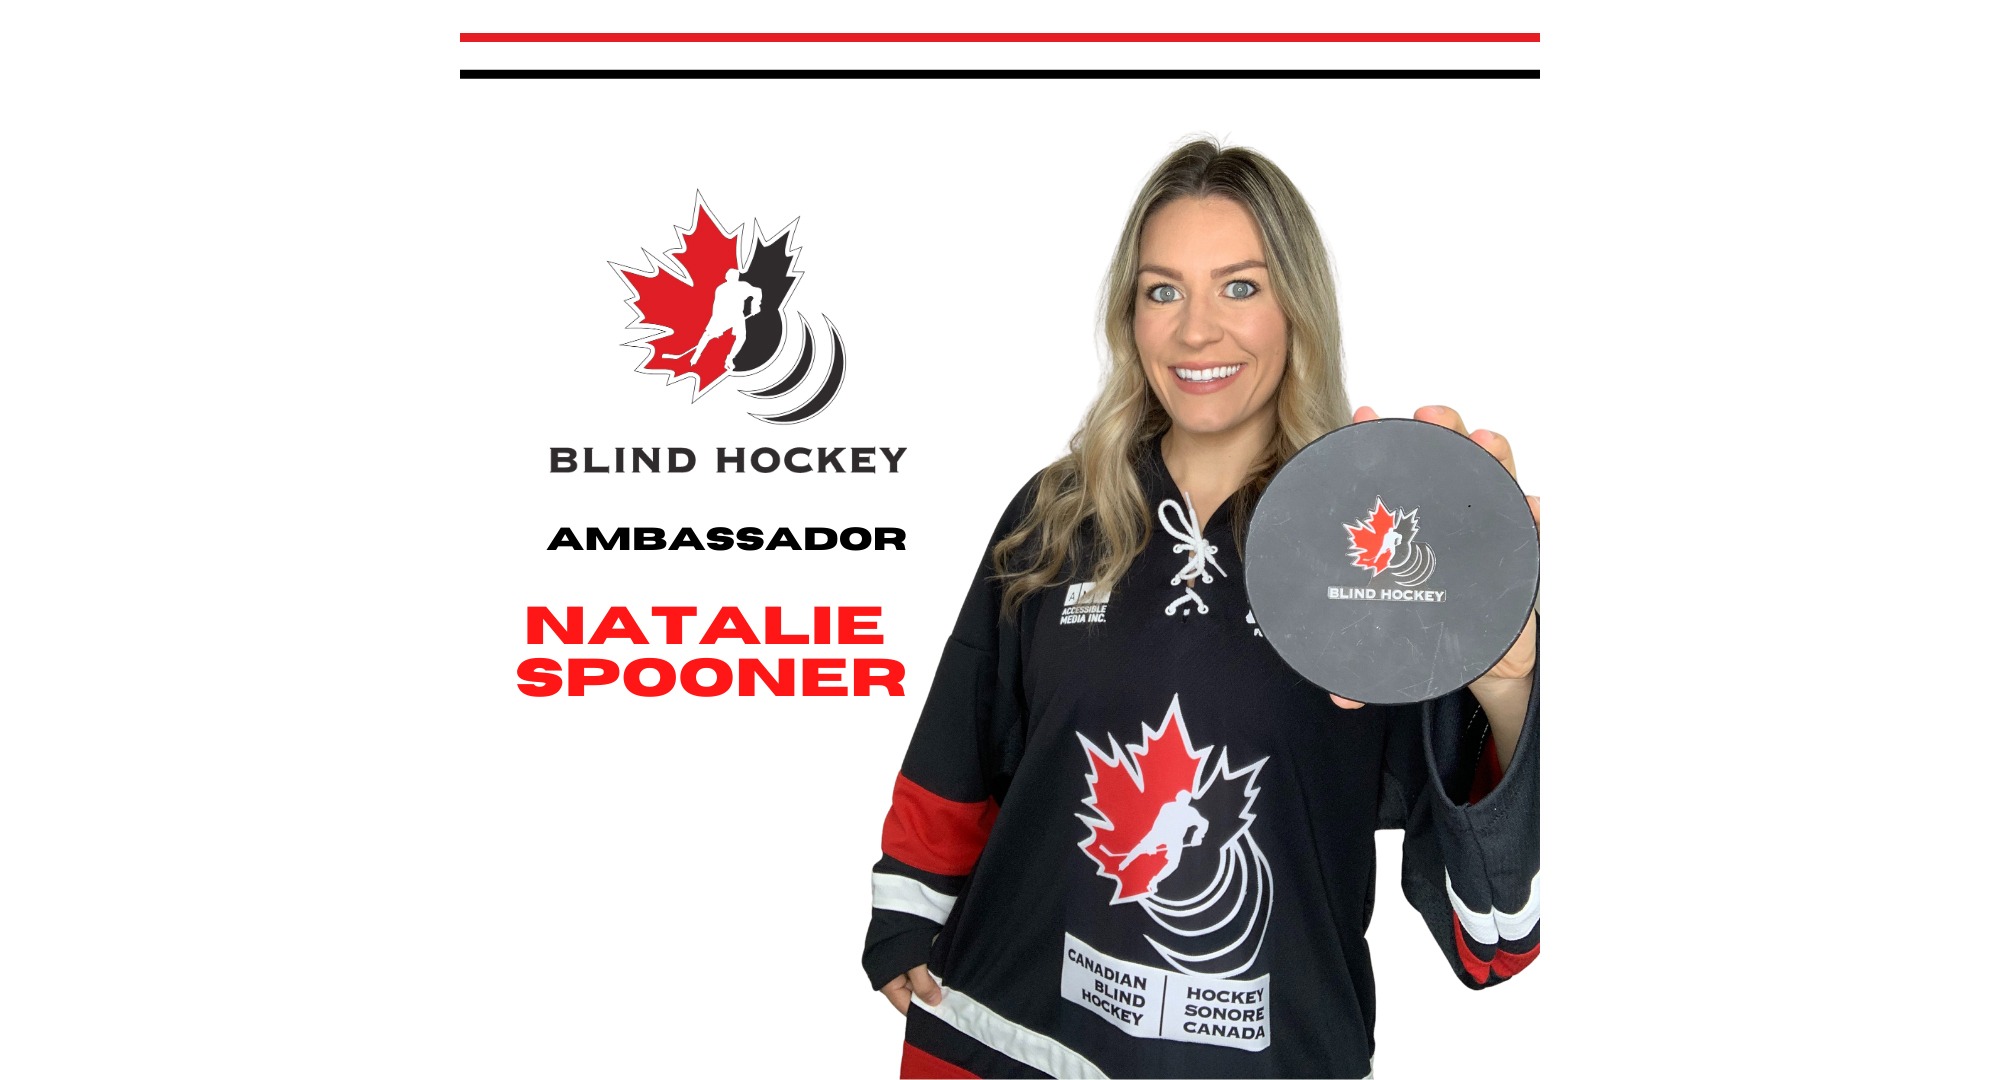 Olympic Gold Medalist and World Champion Natalie Spooner